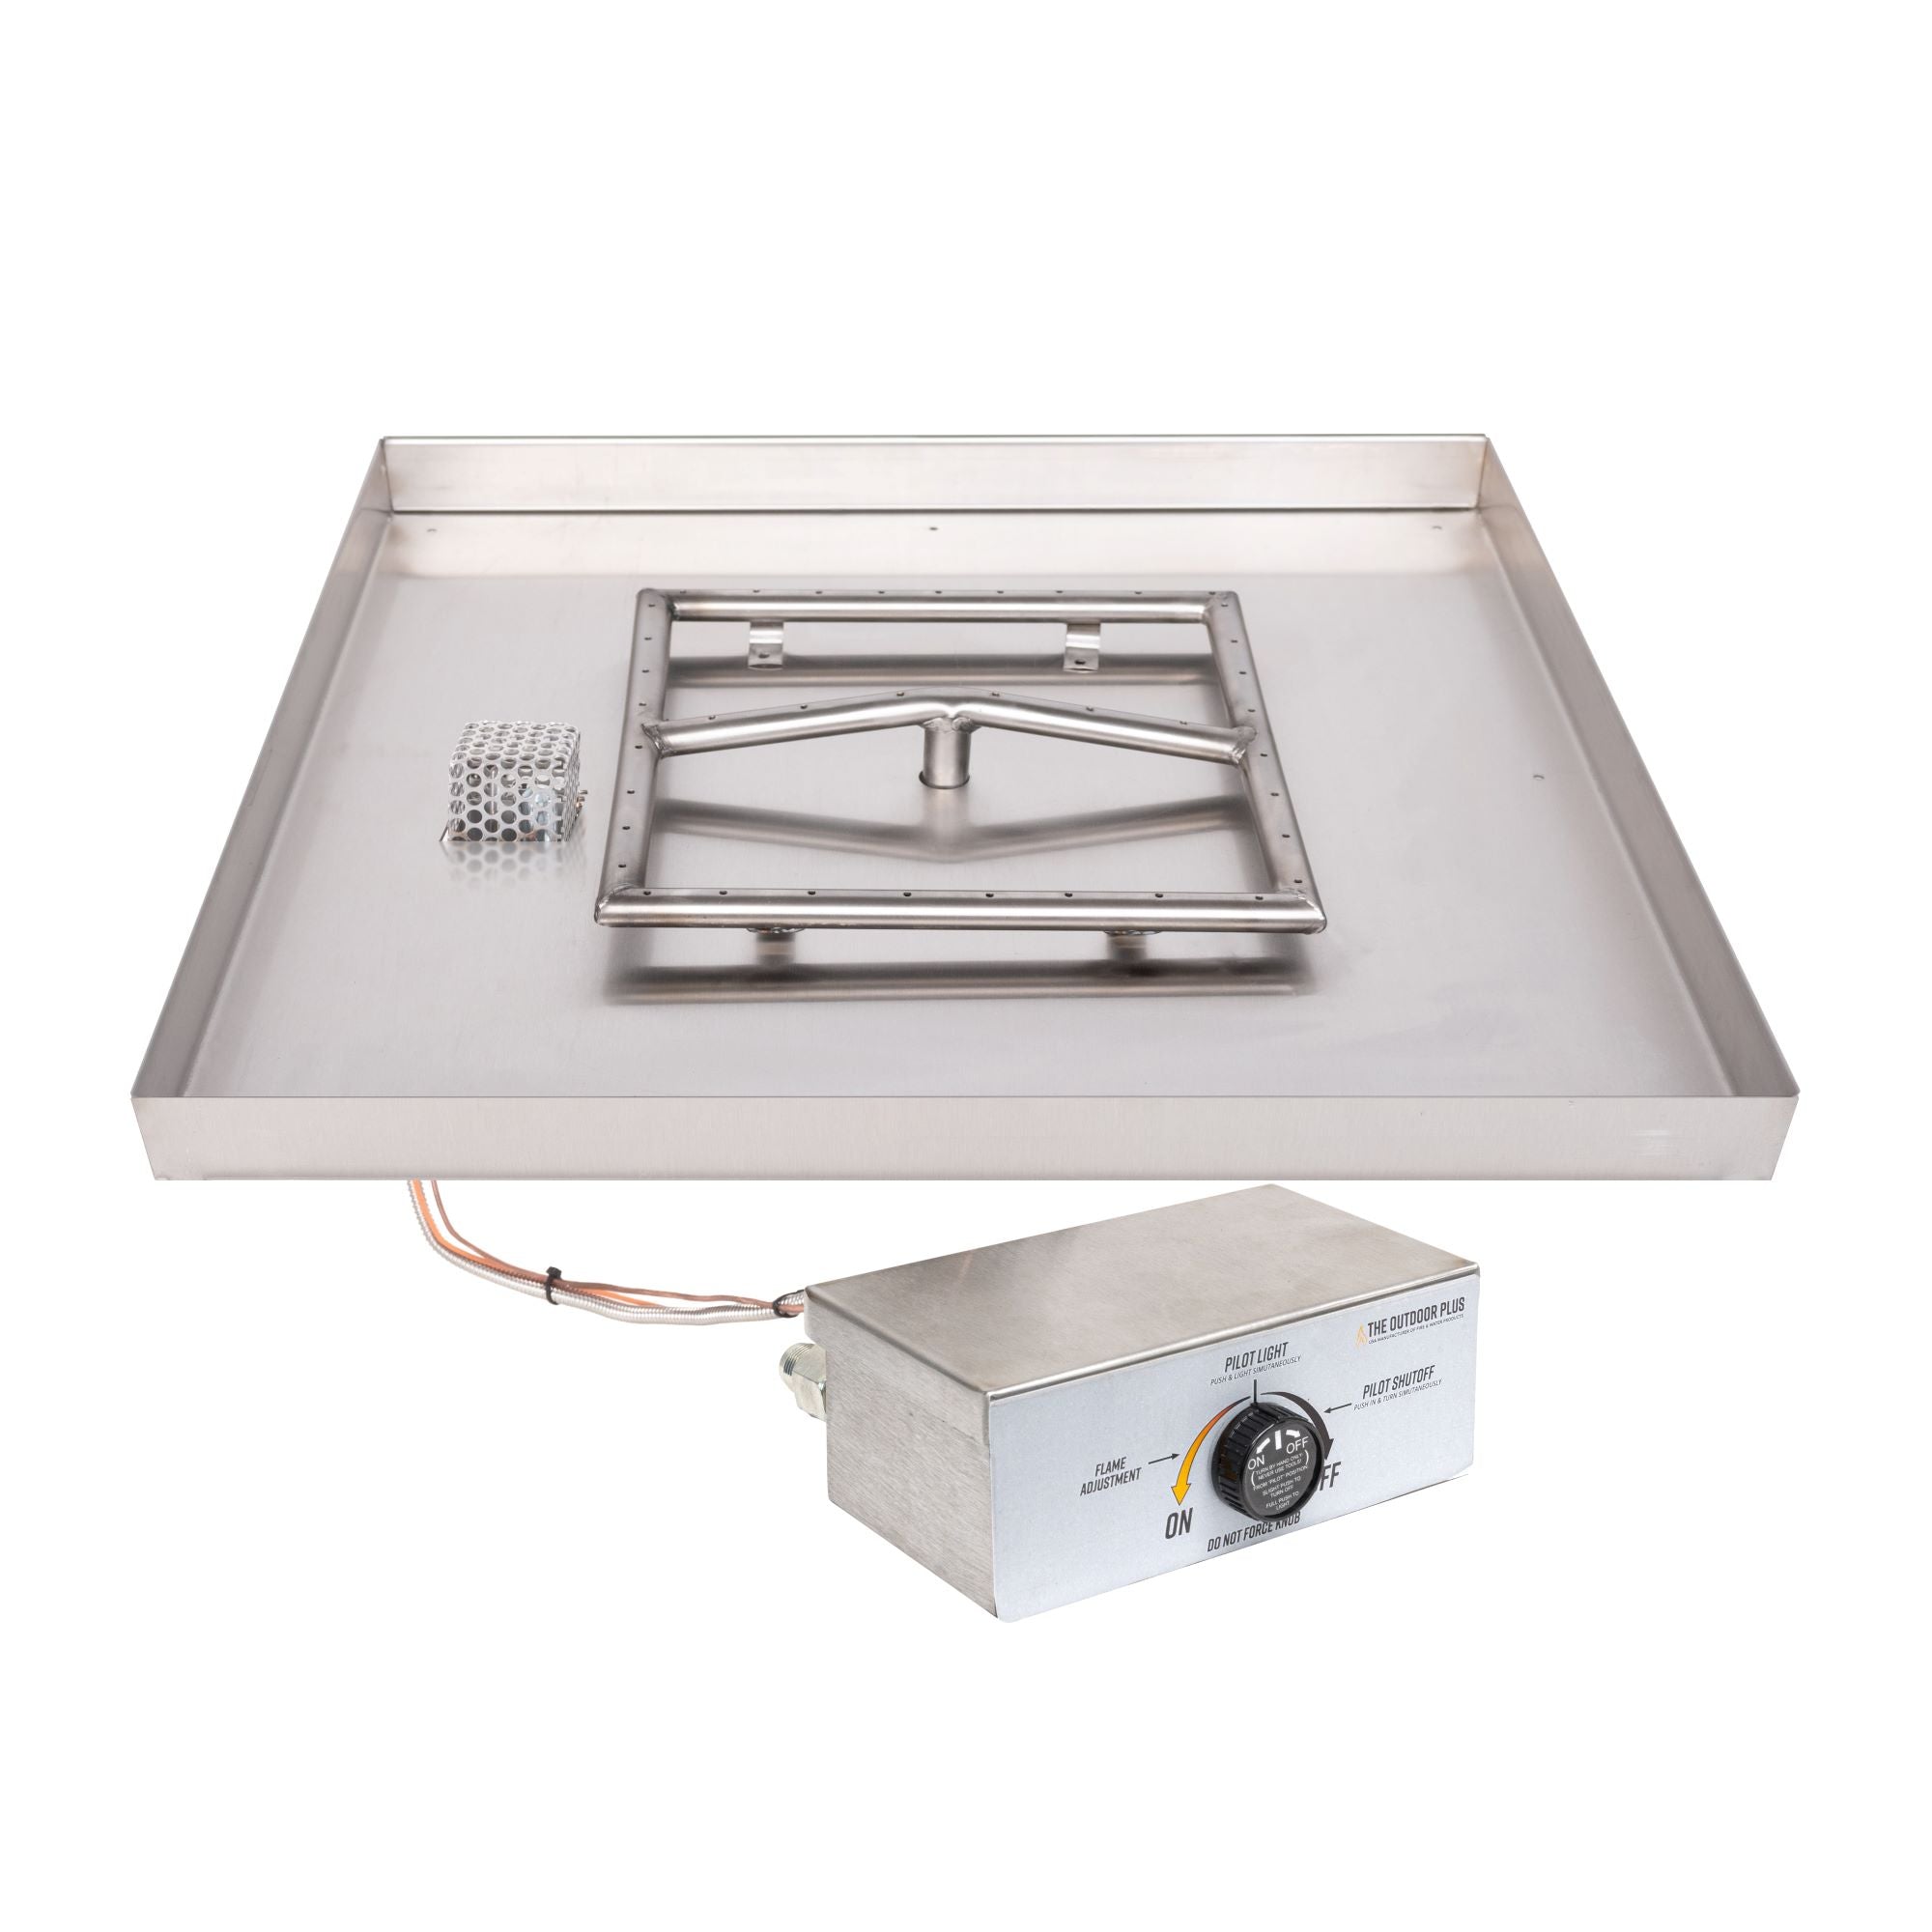 The Outdoor Plus Square Lipless Drop-in Pan with Stainless Steel Square Burner